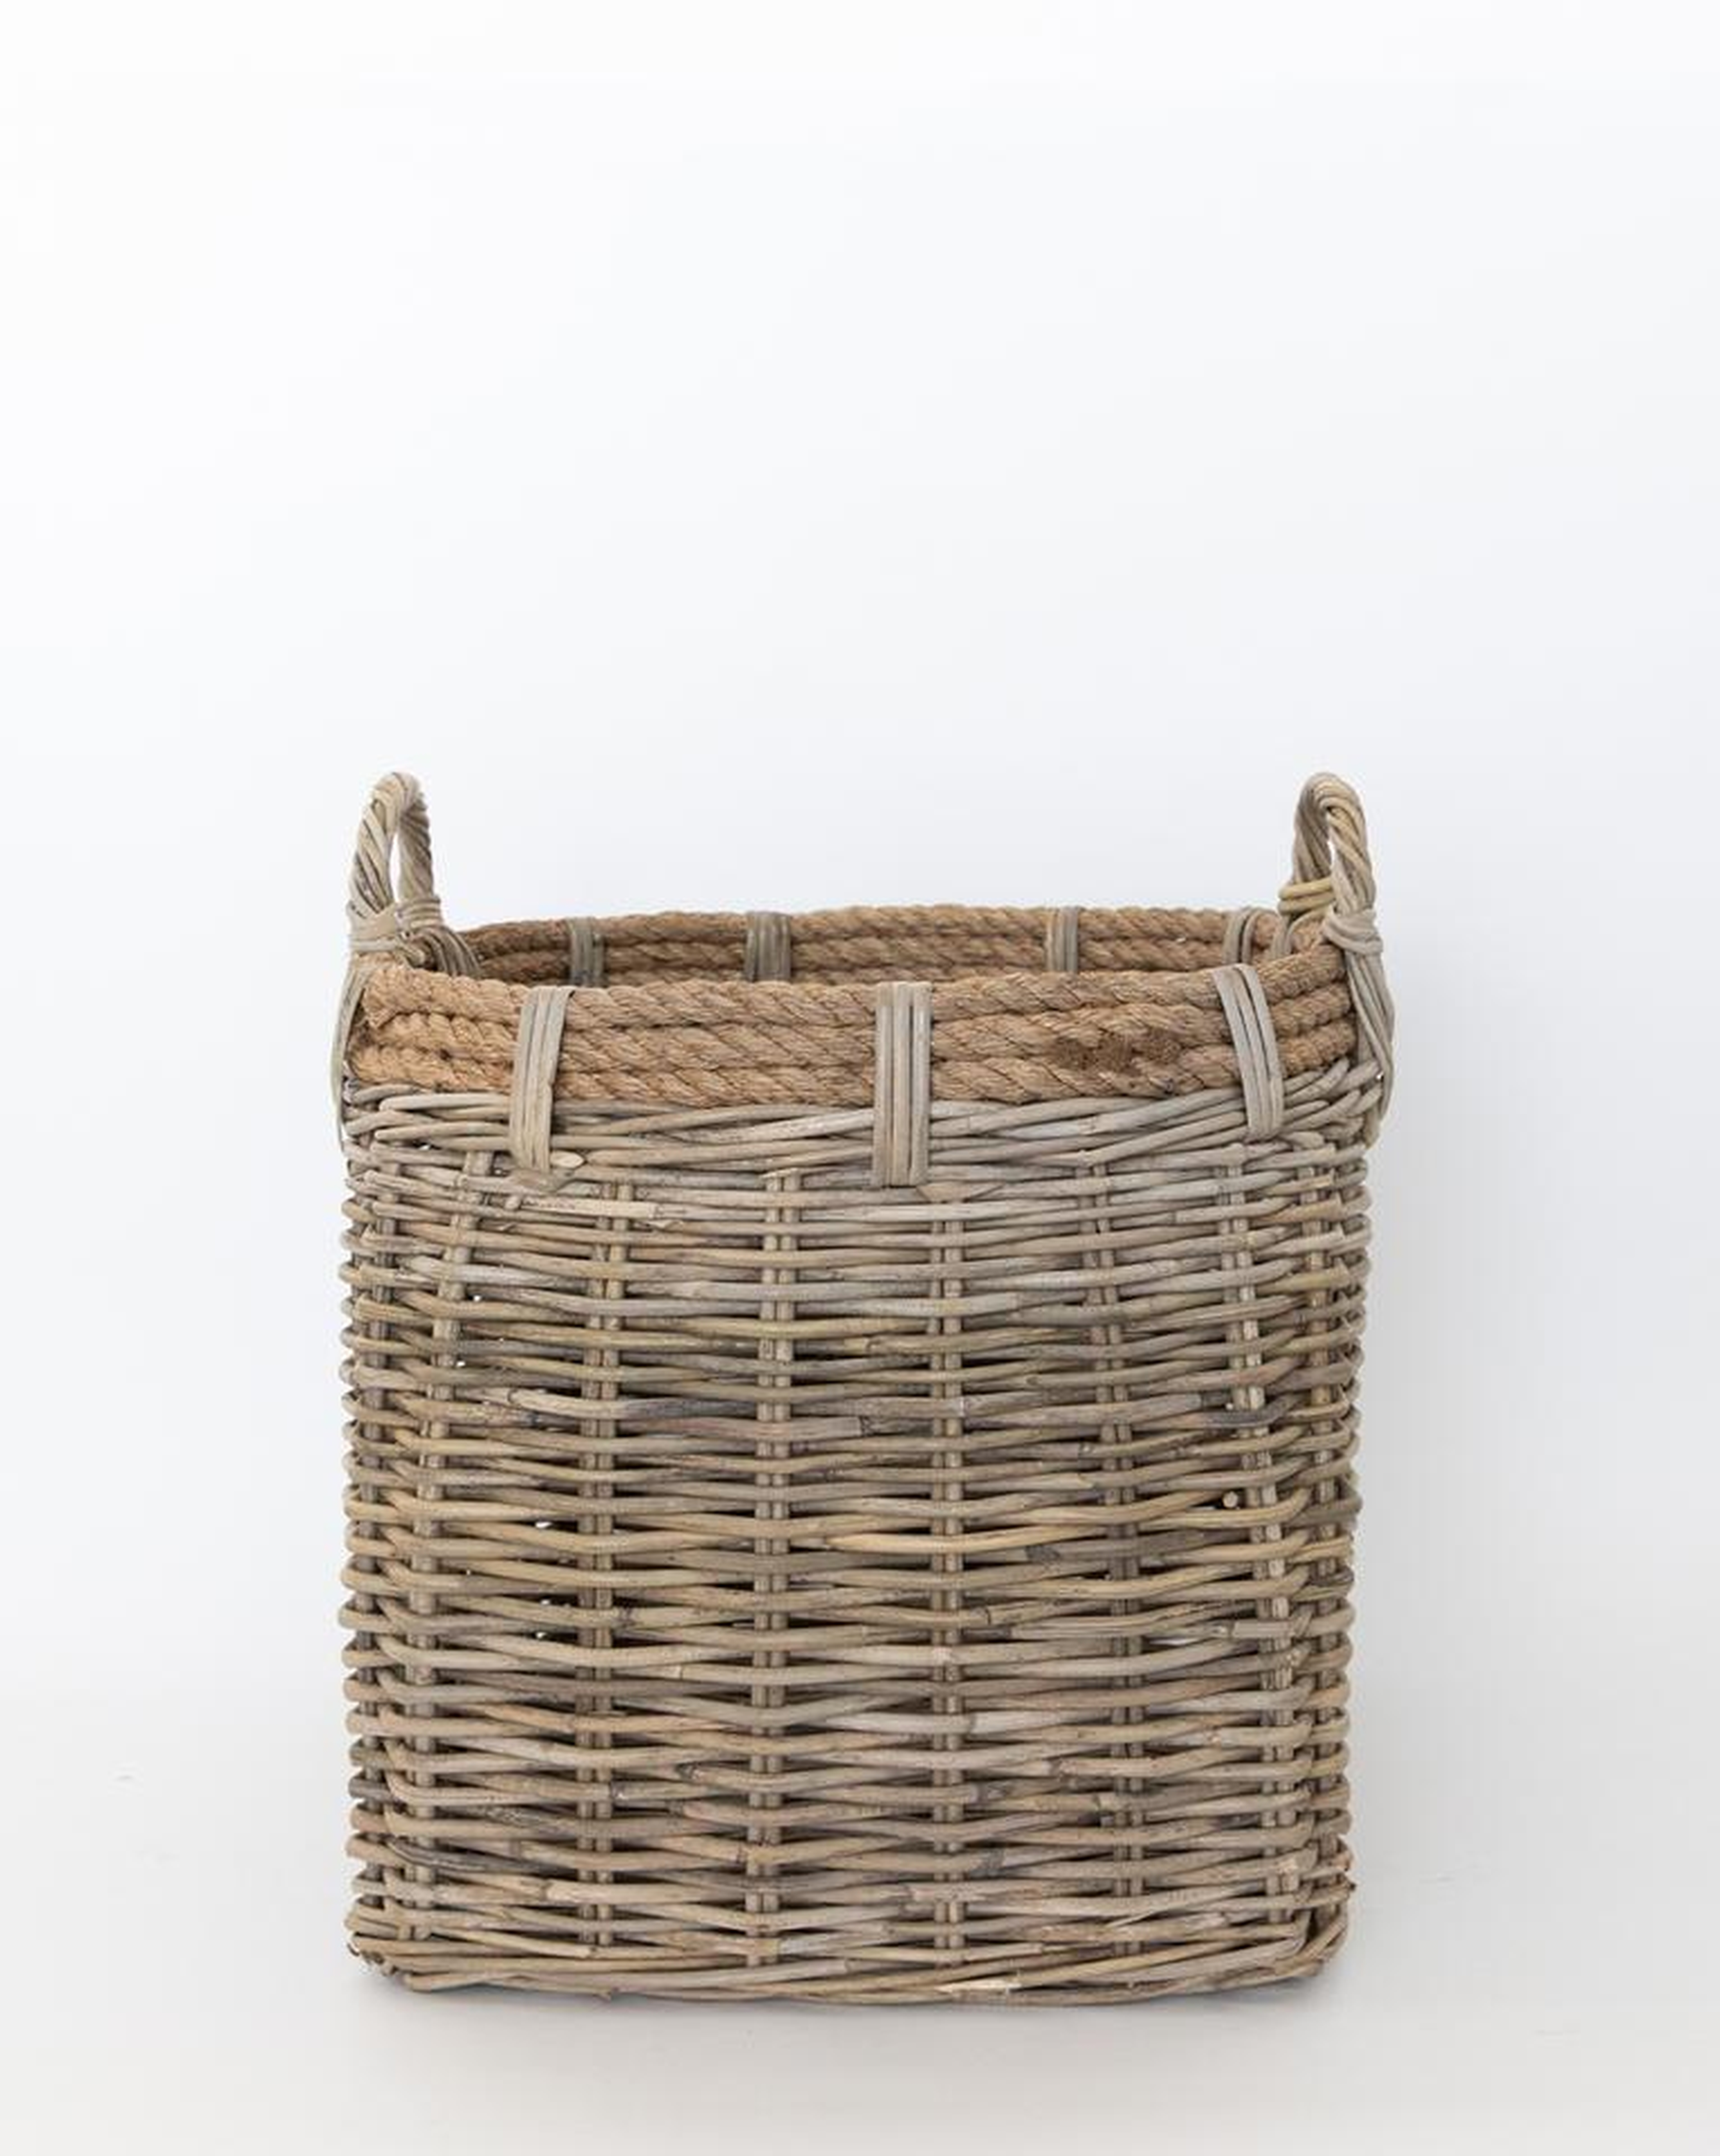 PROSECCO HARVEST BASKET LARGE - McGee & Co.